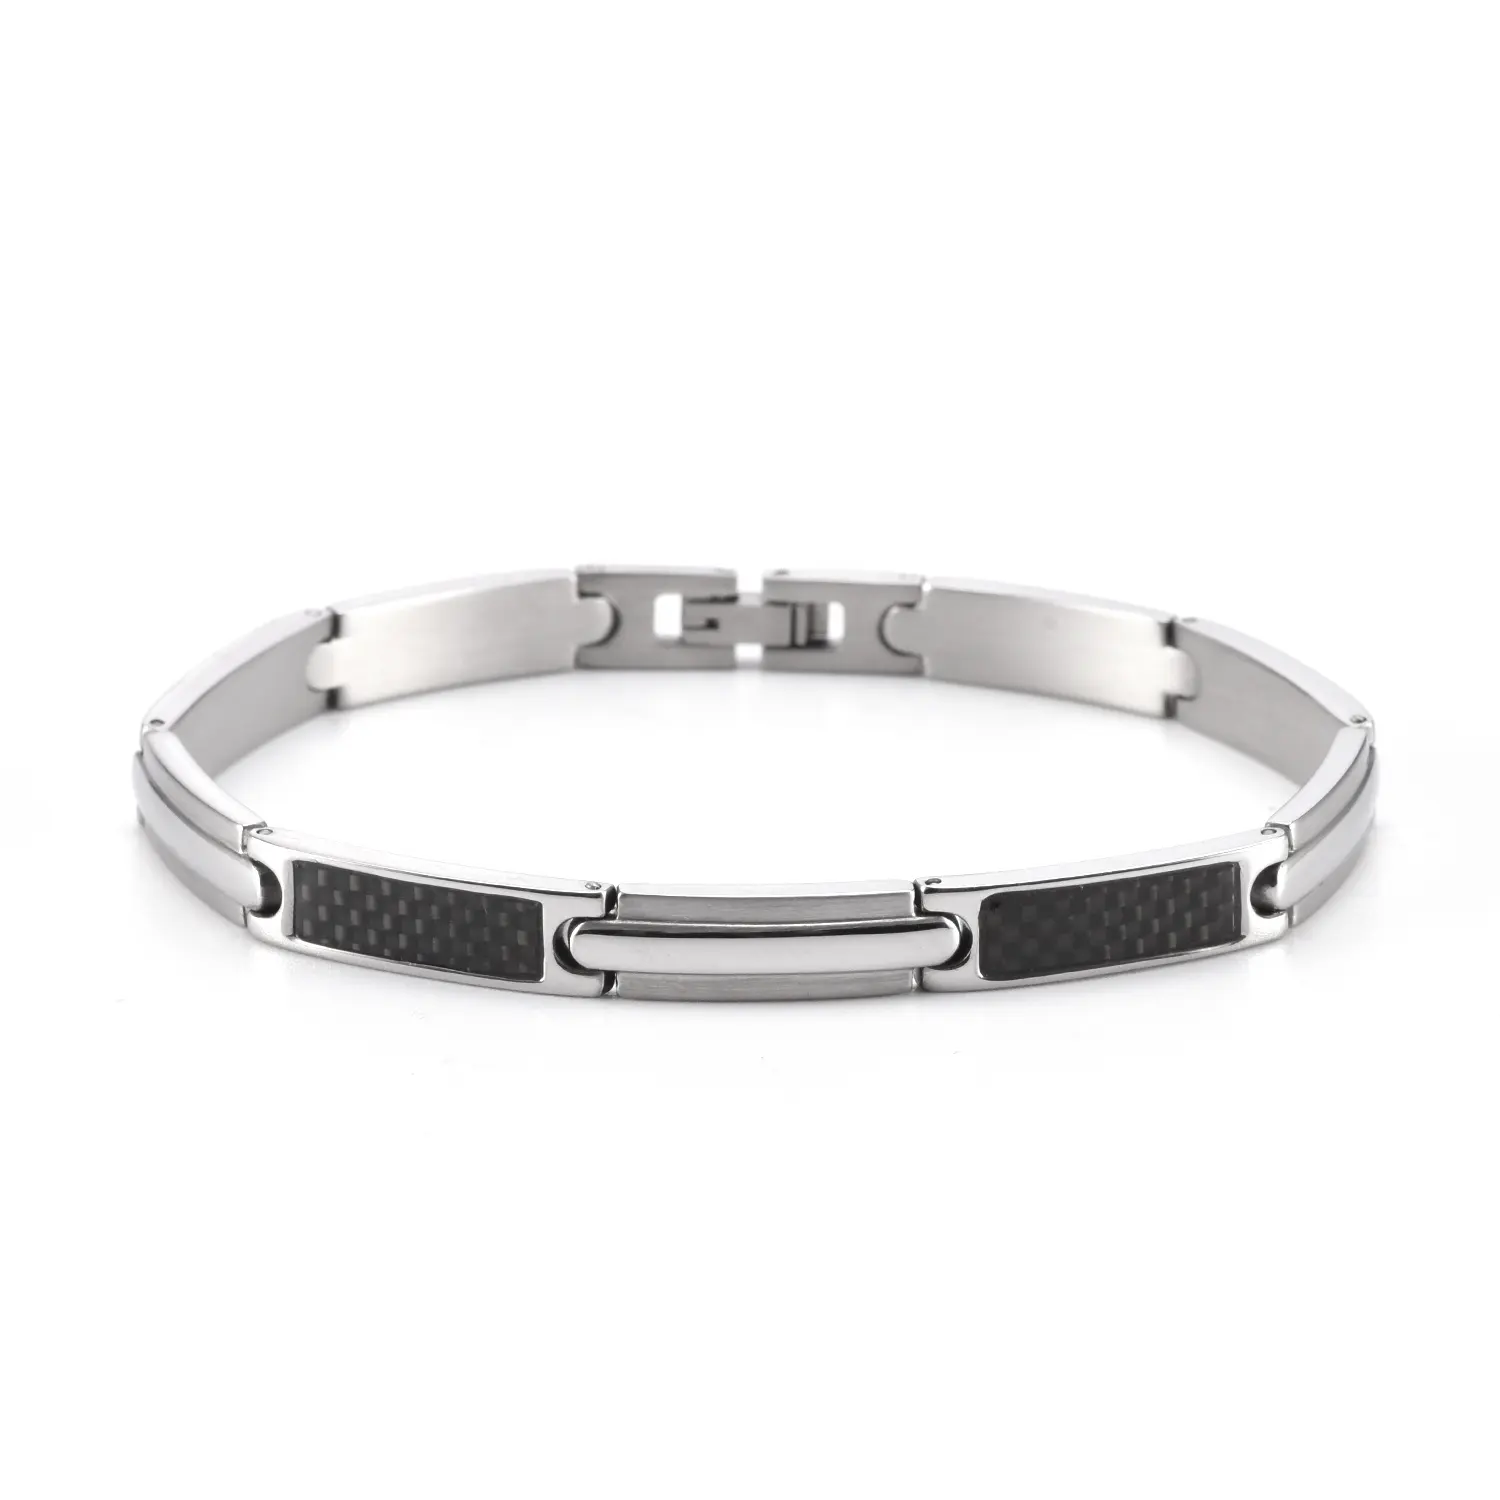 SDA 6mm Mini Wide Stainless Steel Magnetic Therapy Energy Bracelet for Healthy Care Jewelry